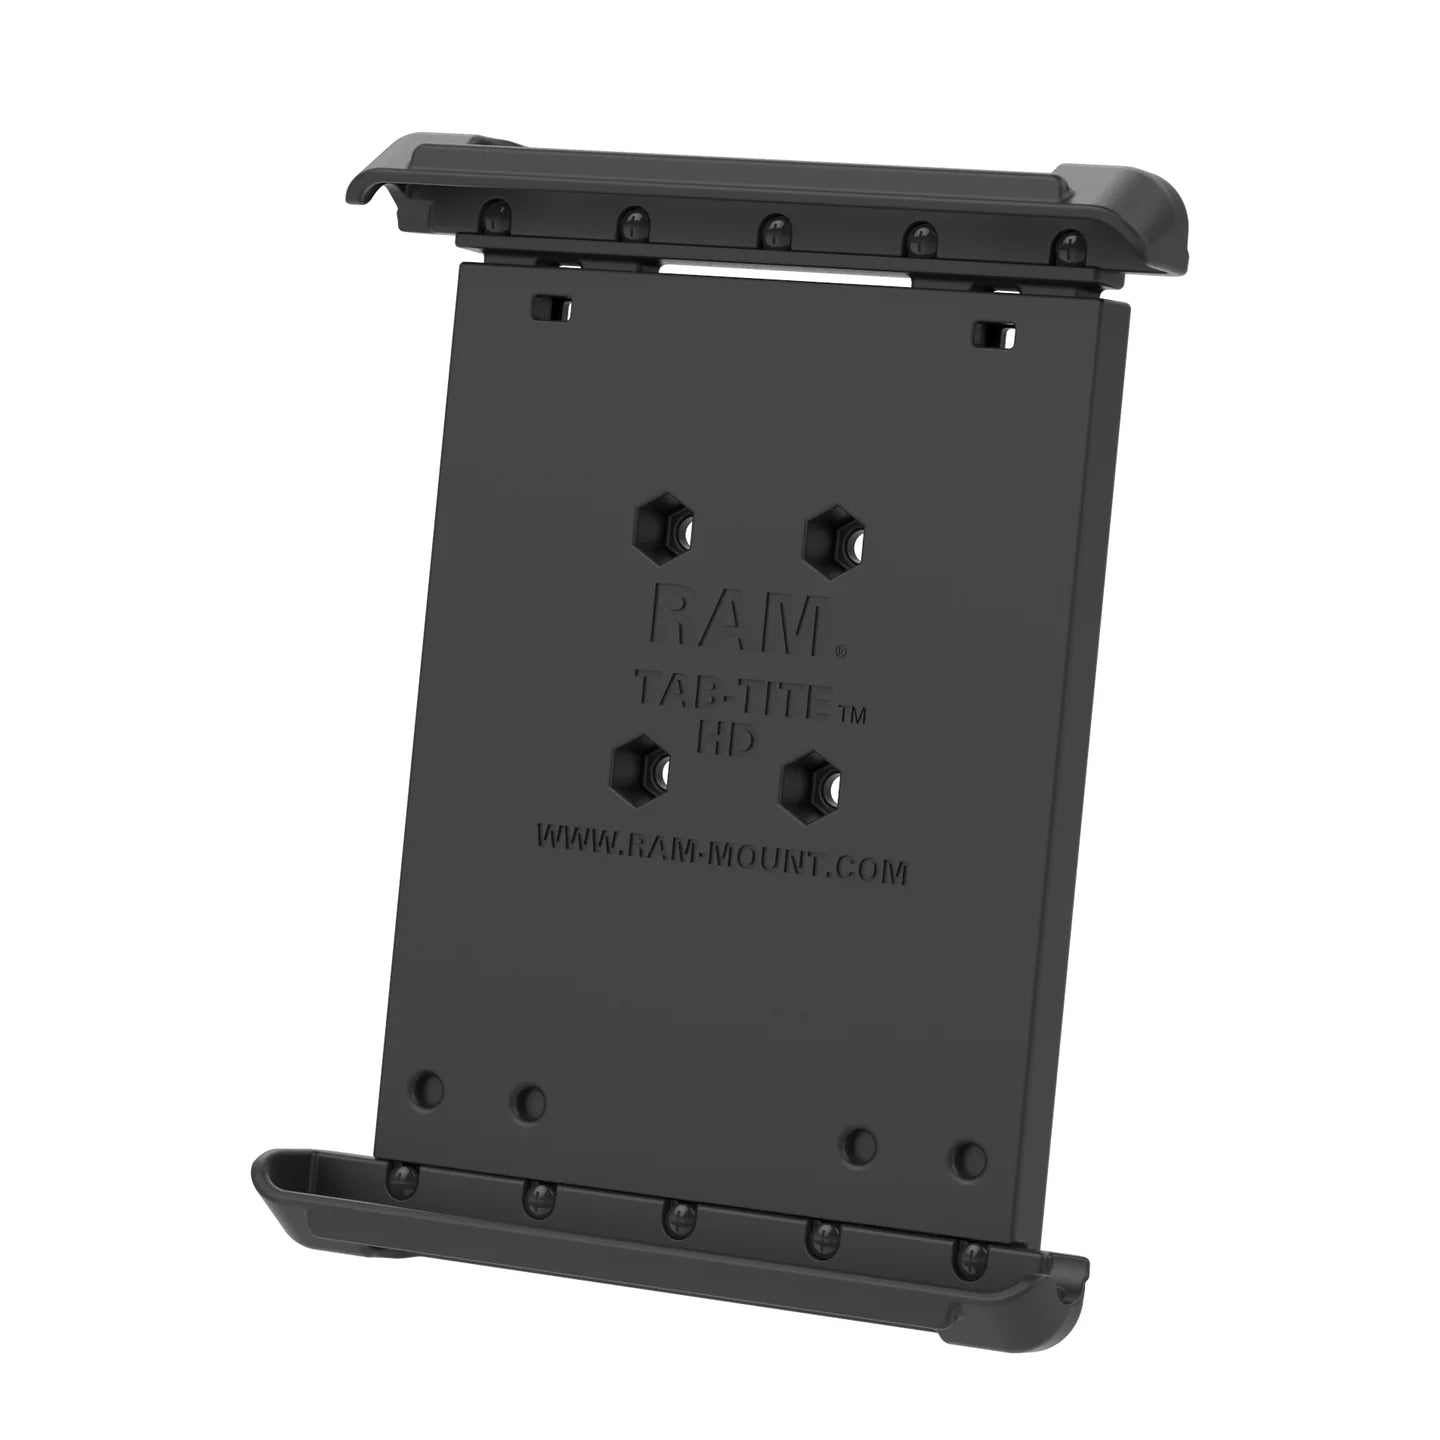 RAM® Tab-Tite™ Spring Loaded Holder for iPad mini 6 and 7" Tablets